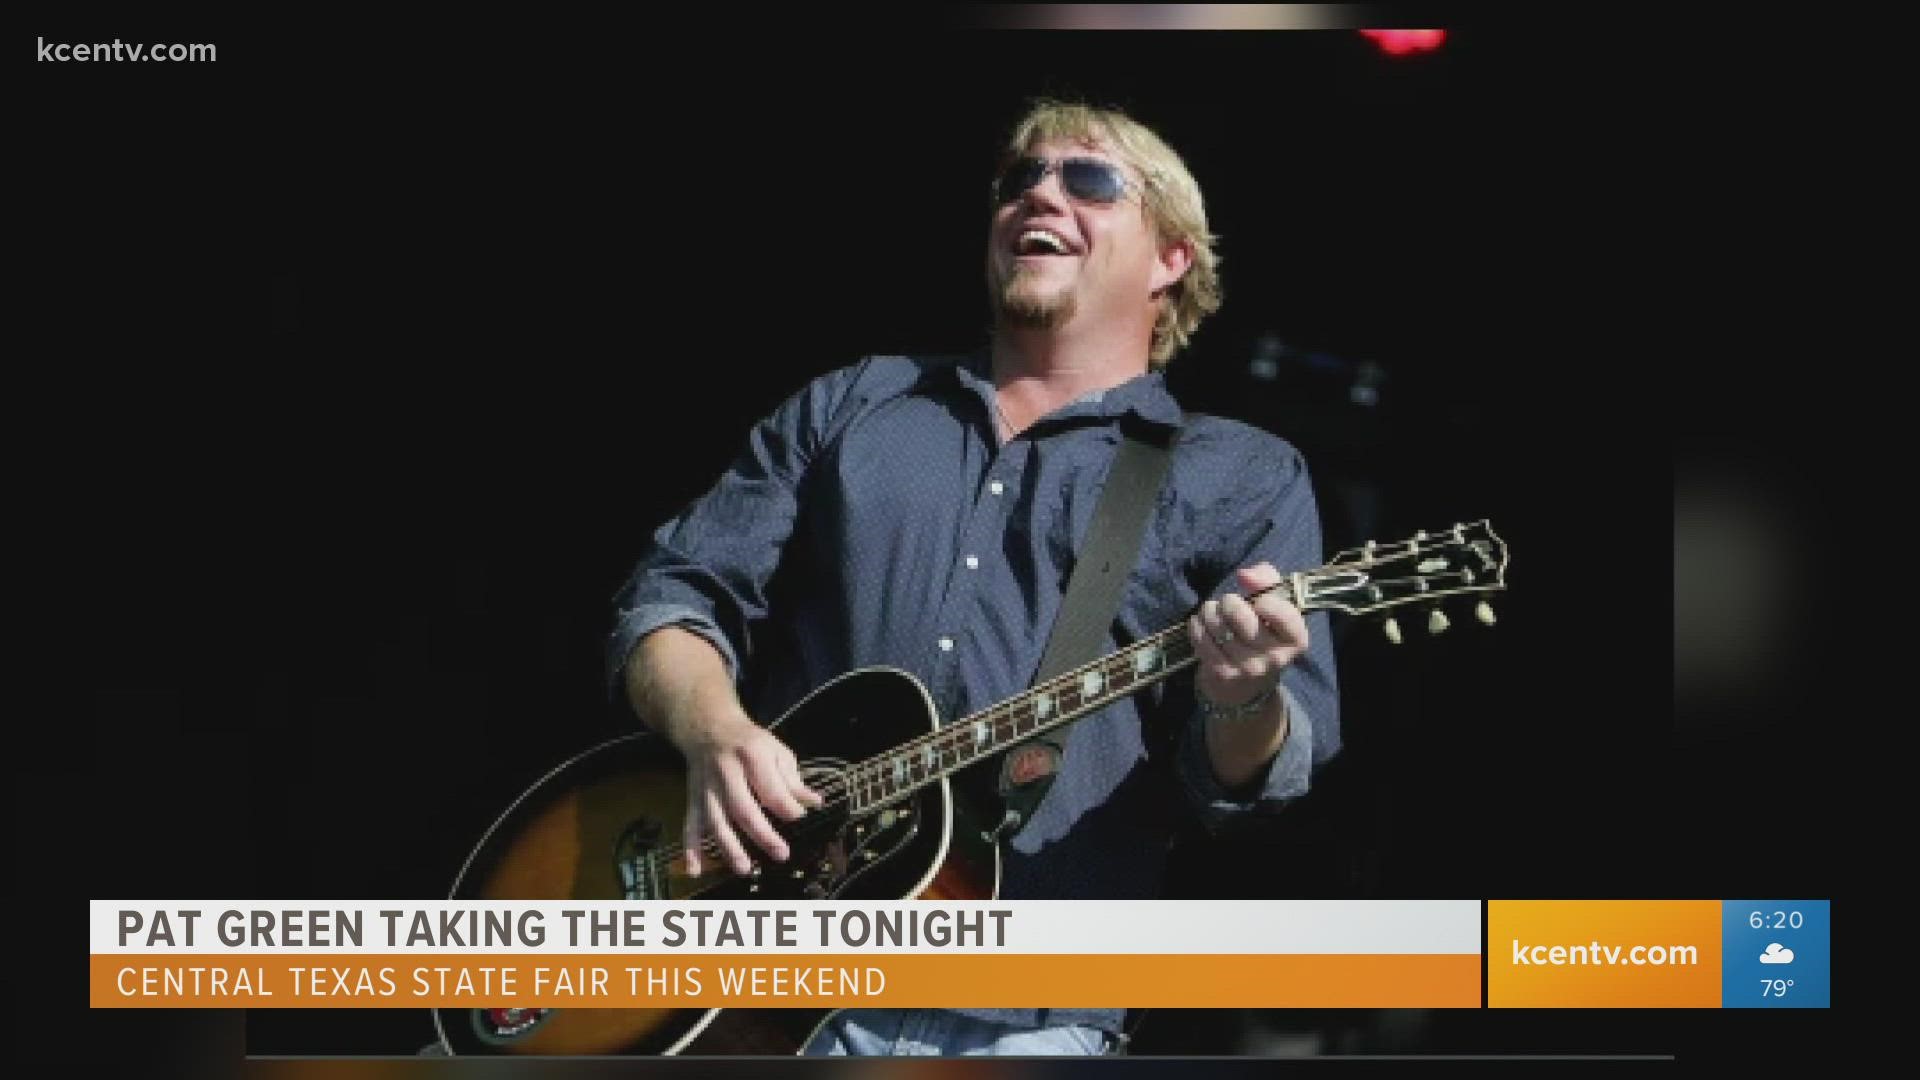 Before taking the stage tonight at the Central Texas State Fair, Pat Green spoke with 6 News about his return to Central Texas and performing live.